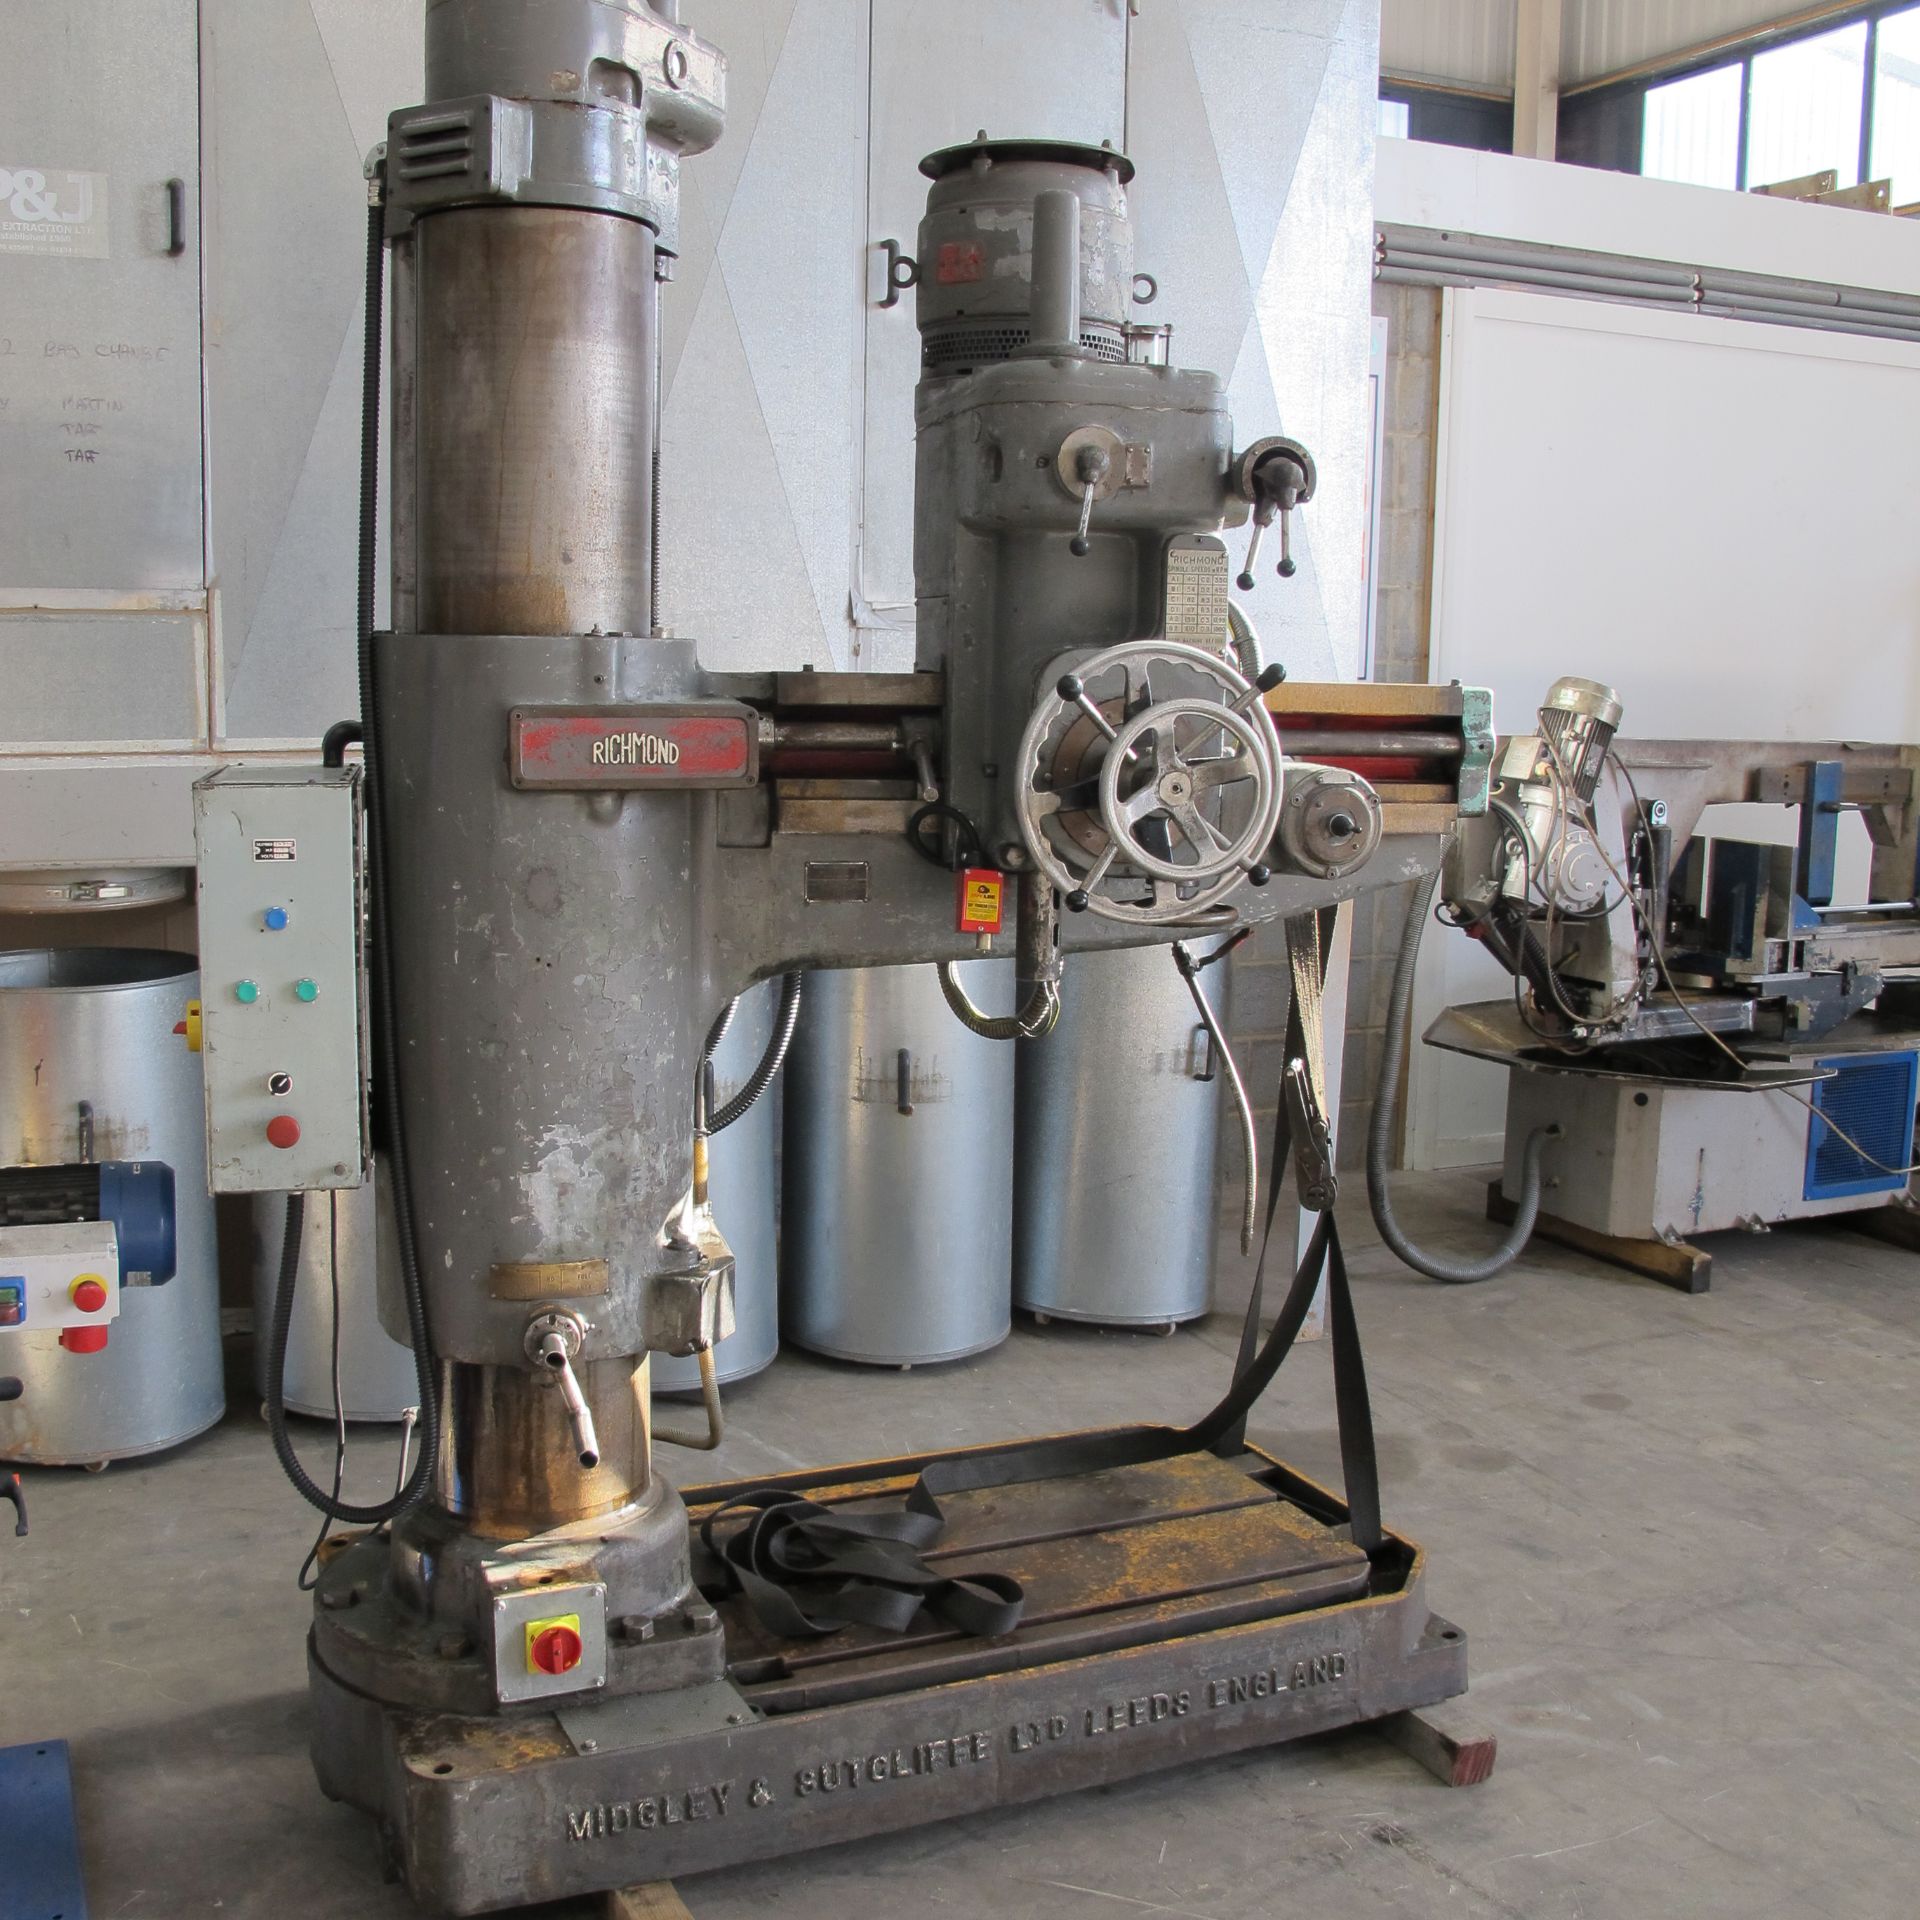 * Richmond Radial Arm Drill; 3' beam; 3 phase; serial number 2490P19. Please note there is a £30 + - Image 3 of 4